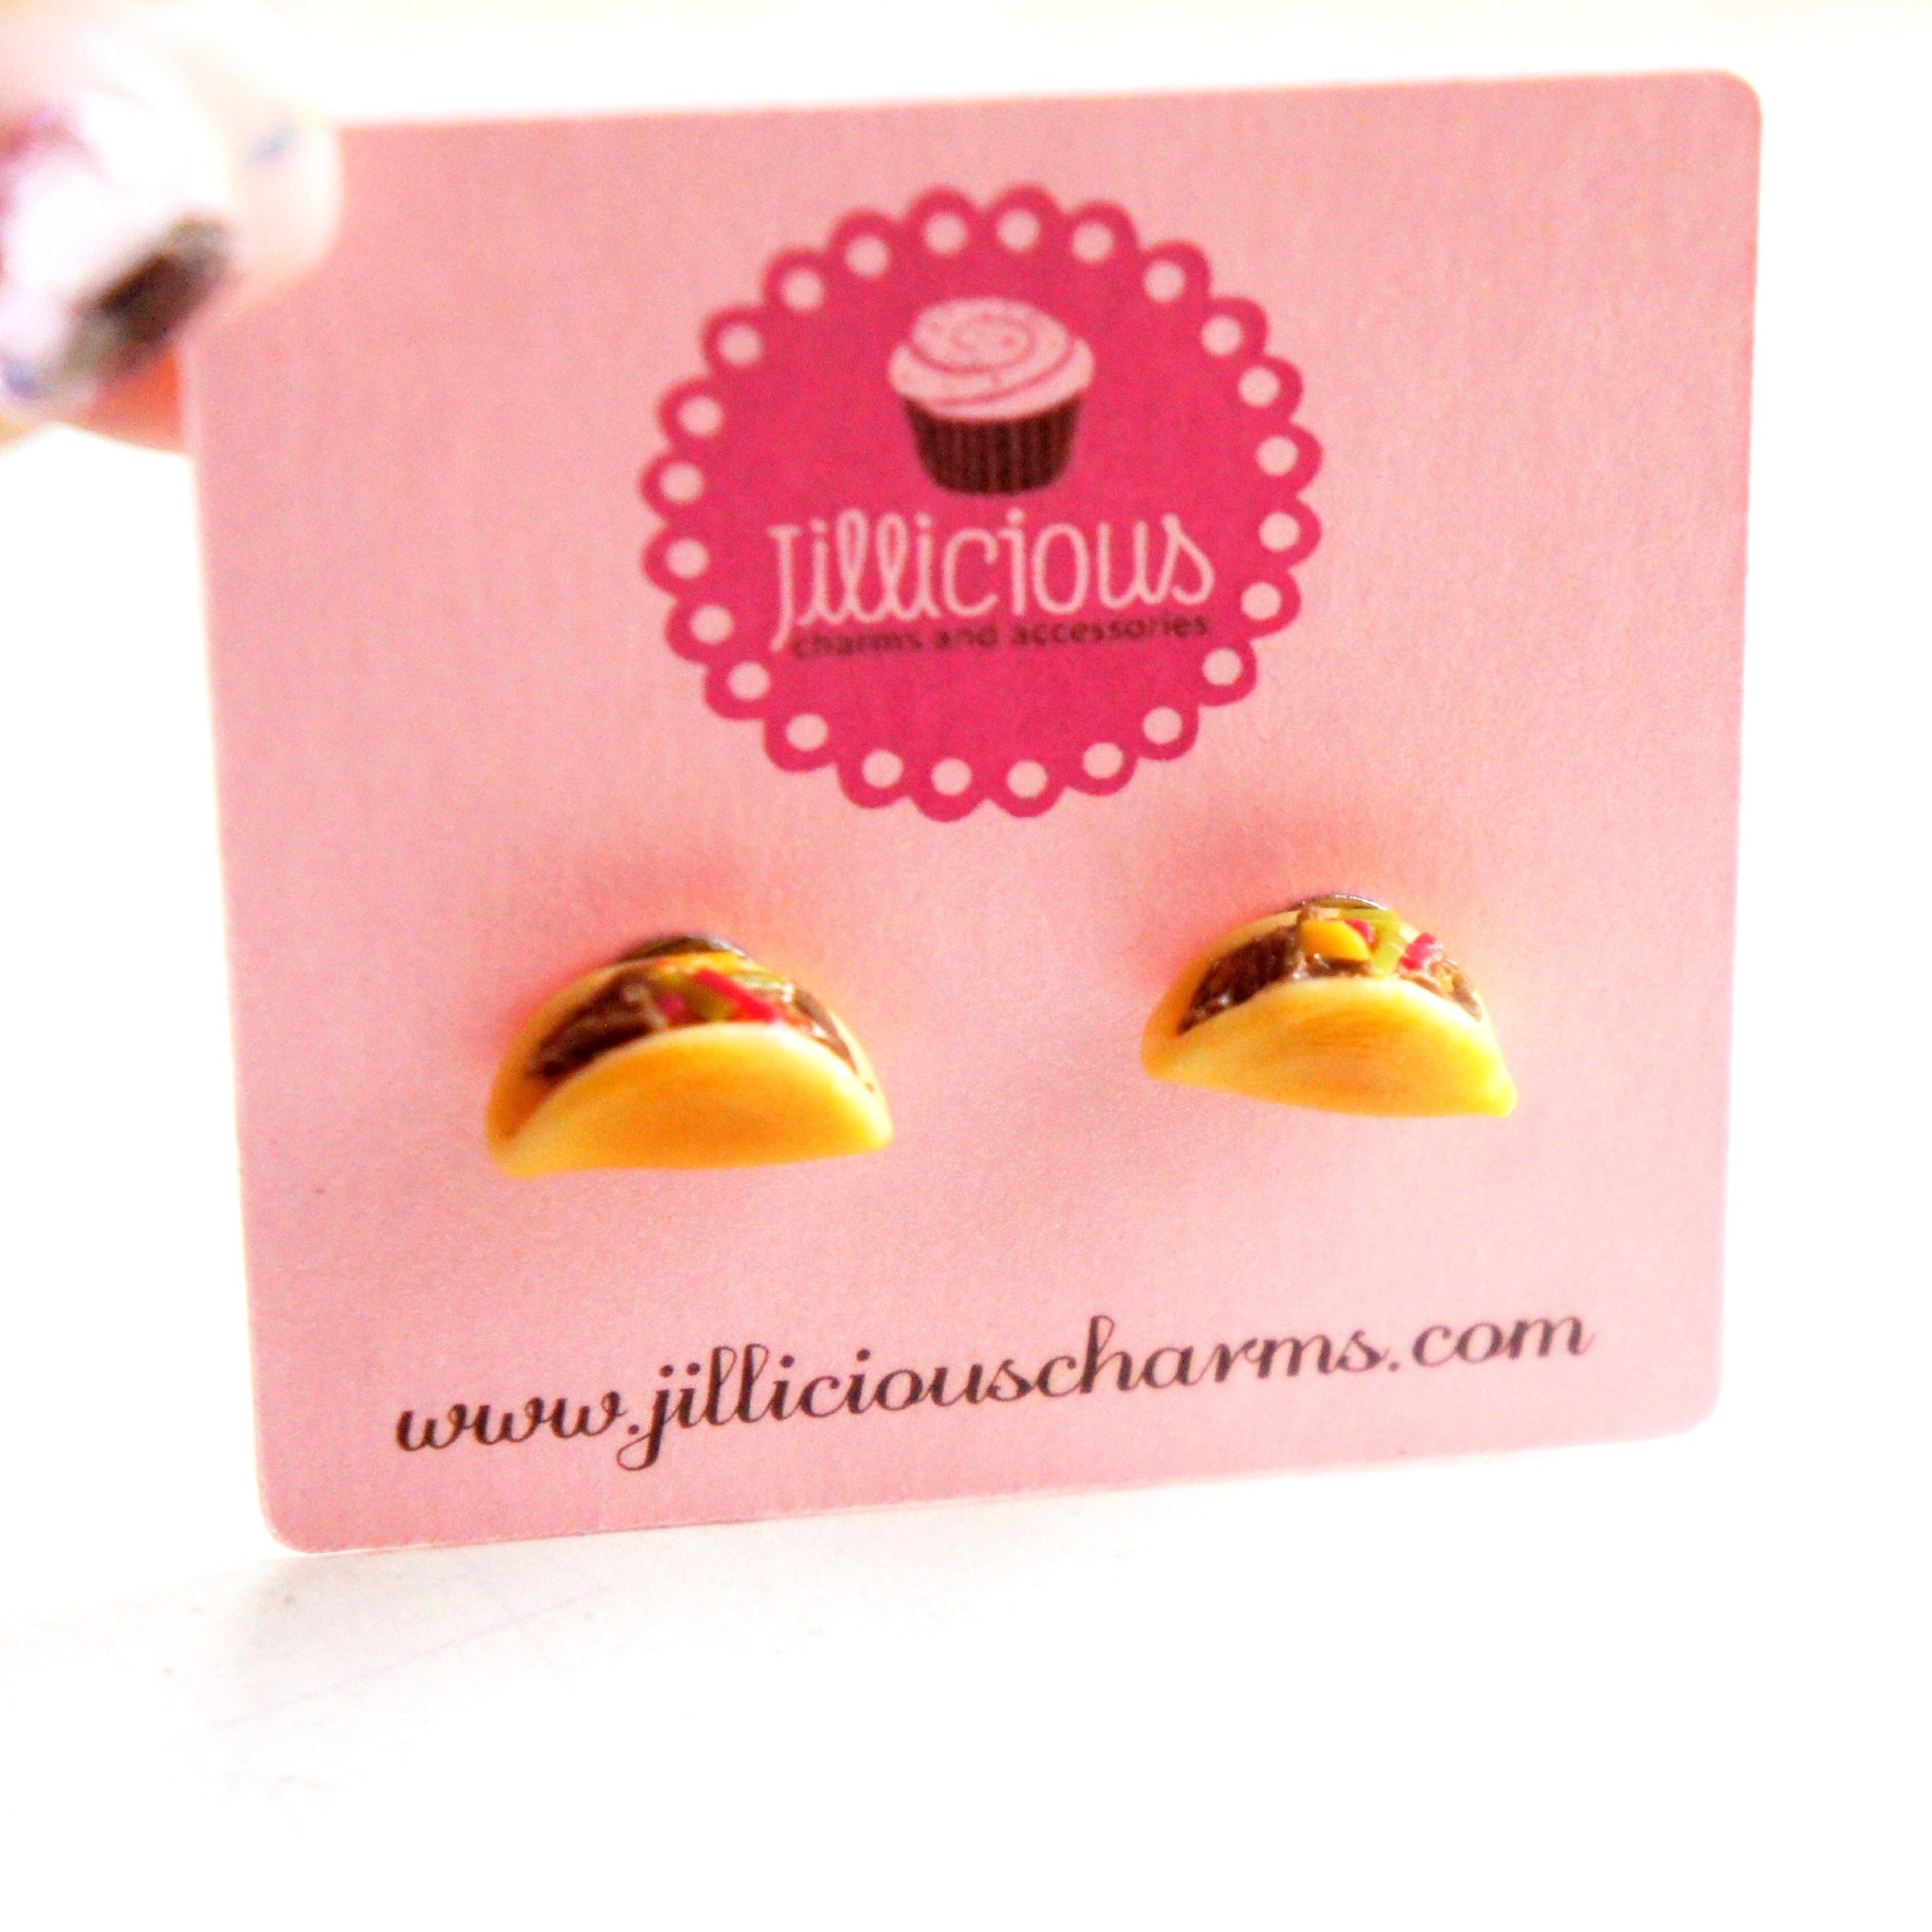 Tacos Stud Earrings - Jillicious charms and accessories